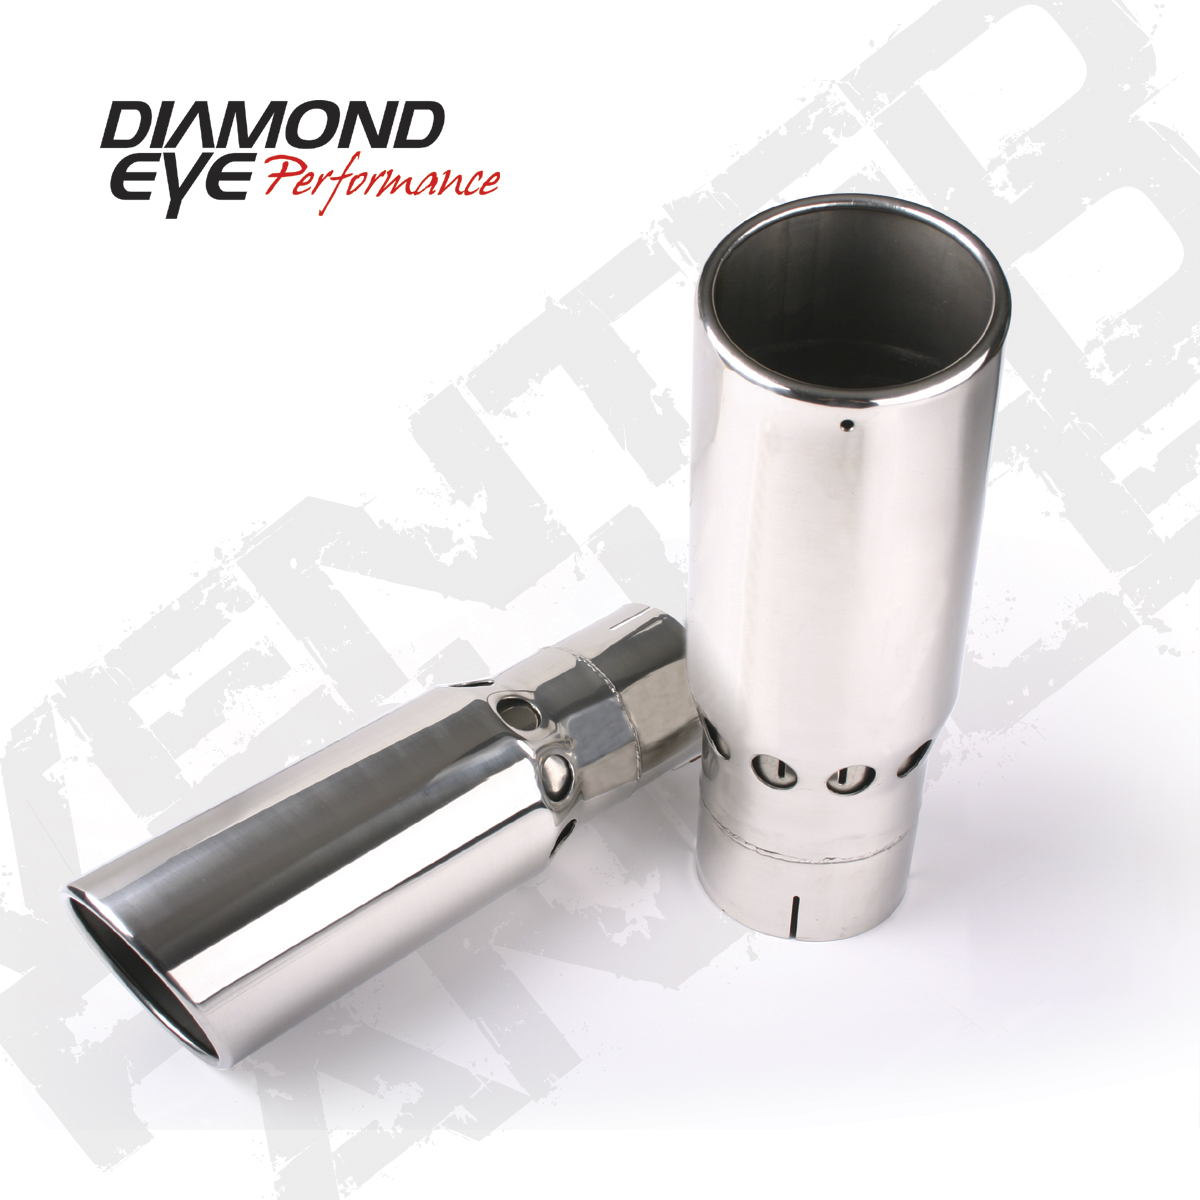 See the Newest Diamond Eye Performance Exhaust Products Available at